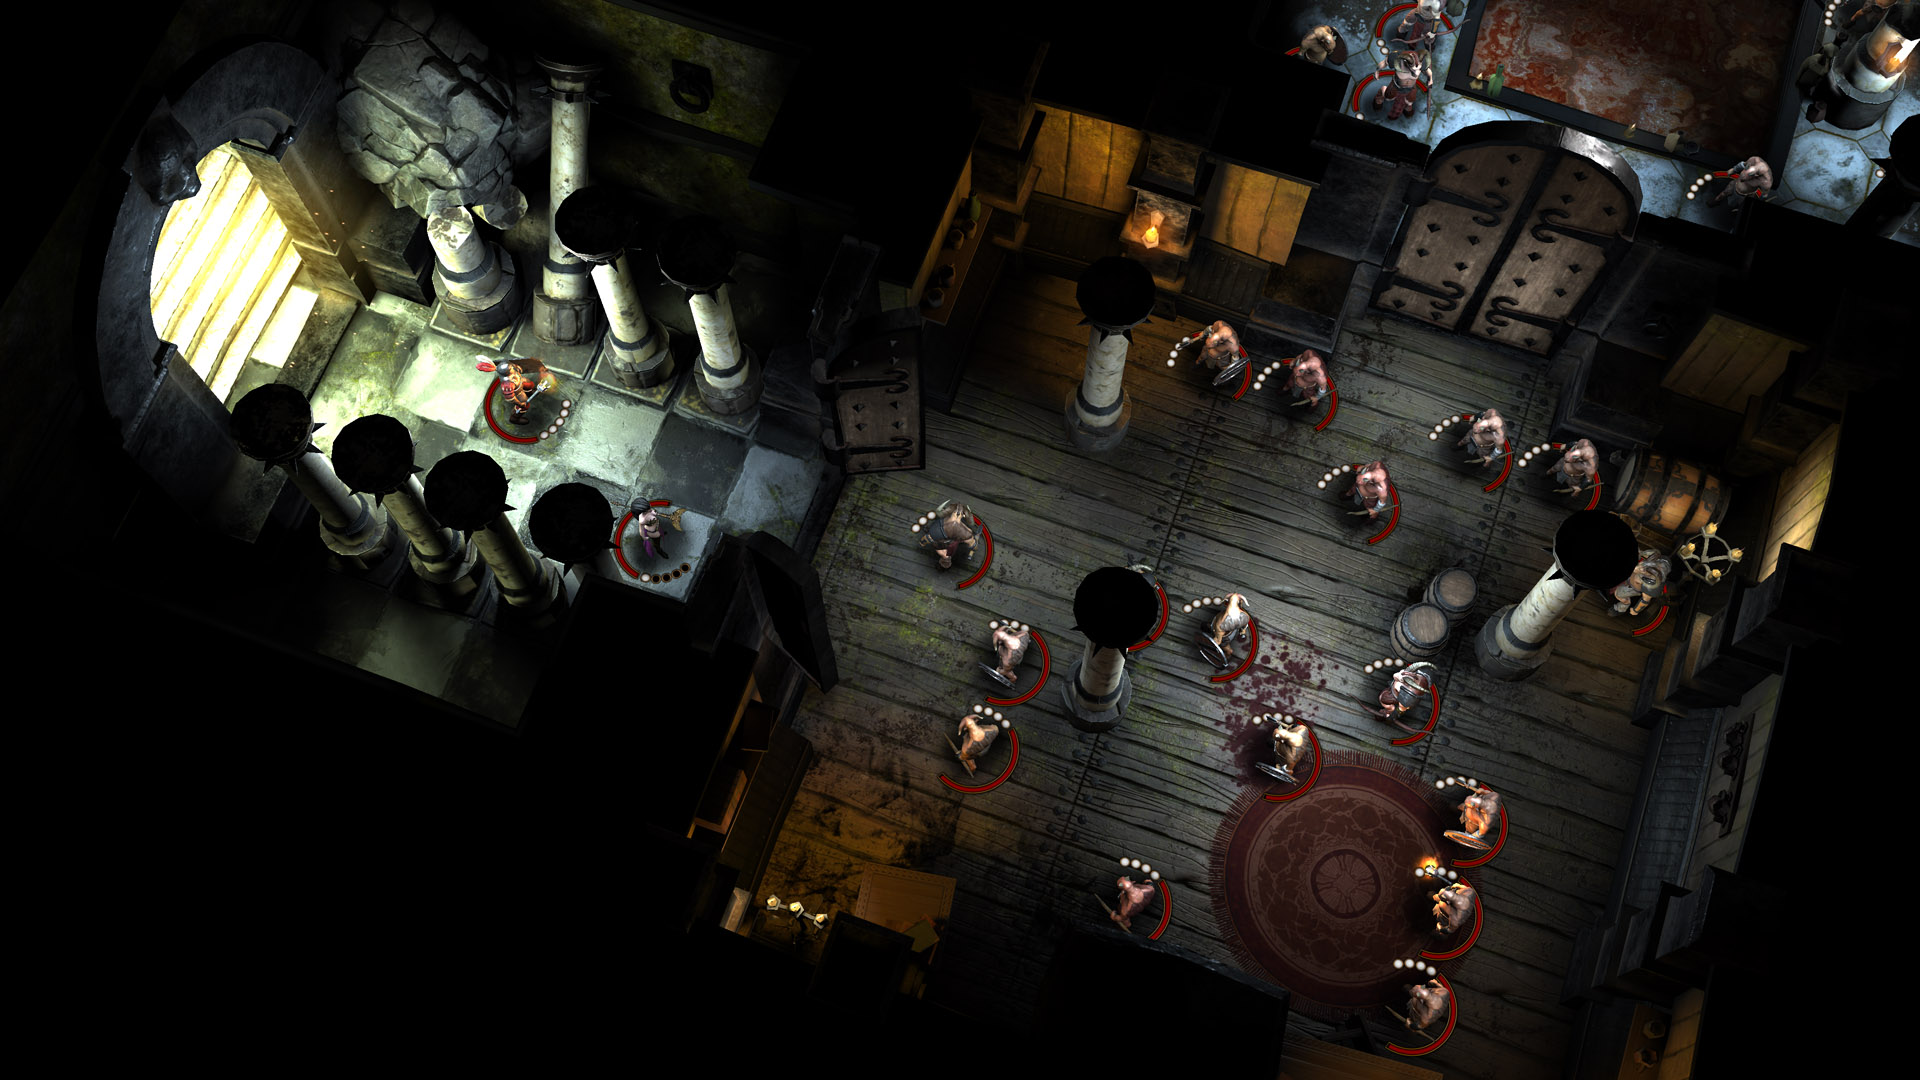 'Warhammer Quest 2' Has New Screens, and a Demo at Warhammer Fest This Weekend